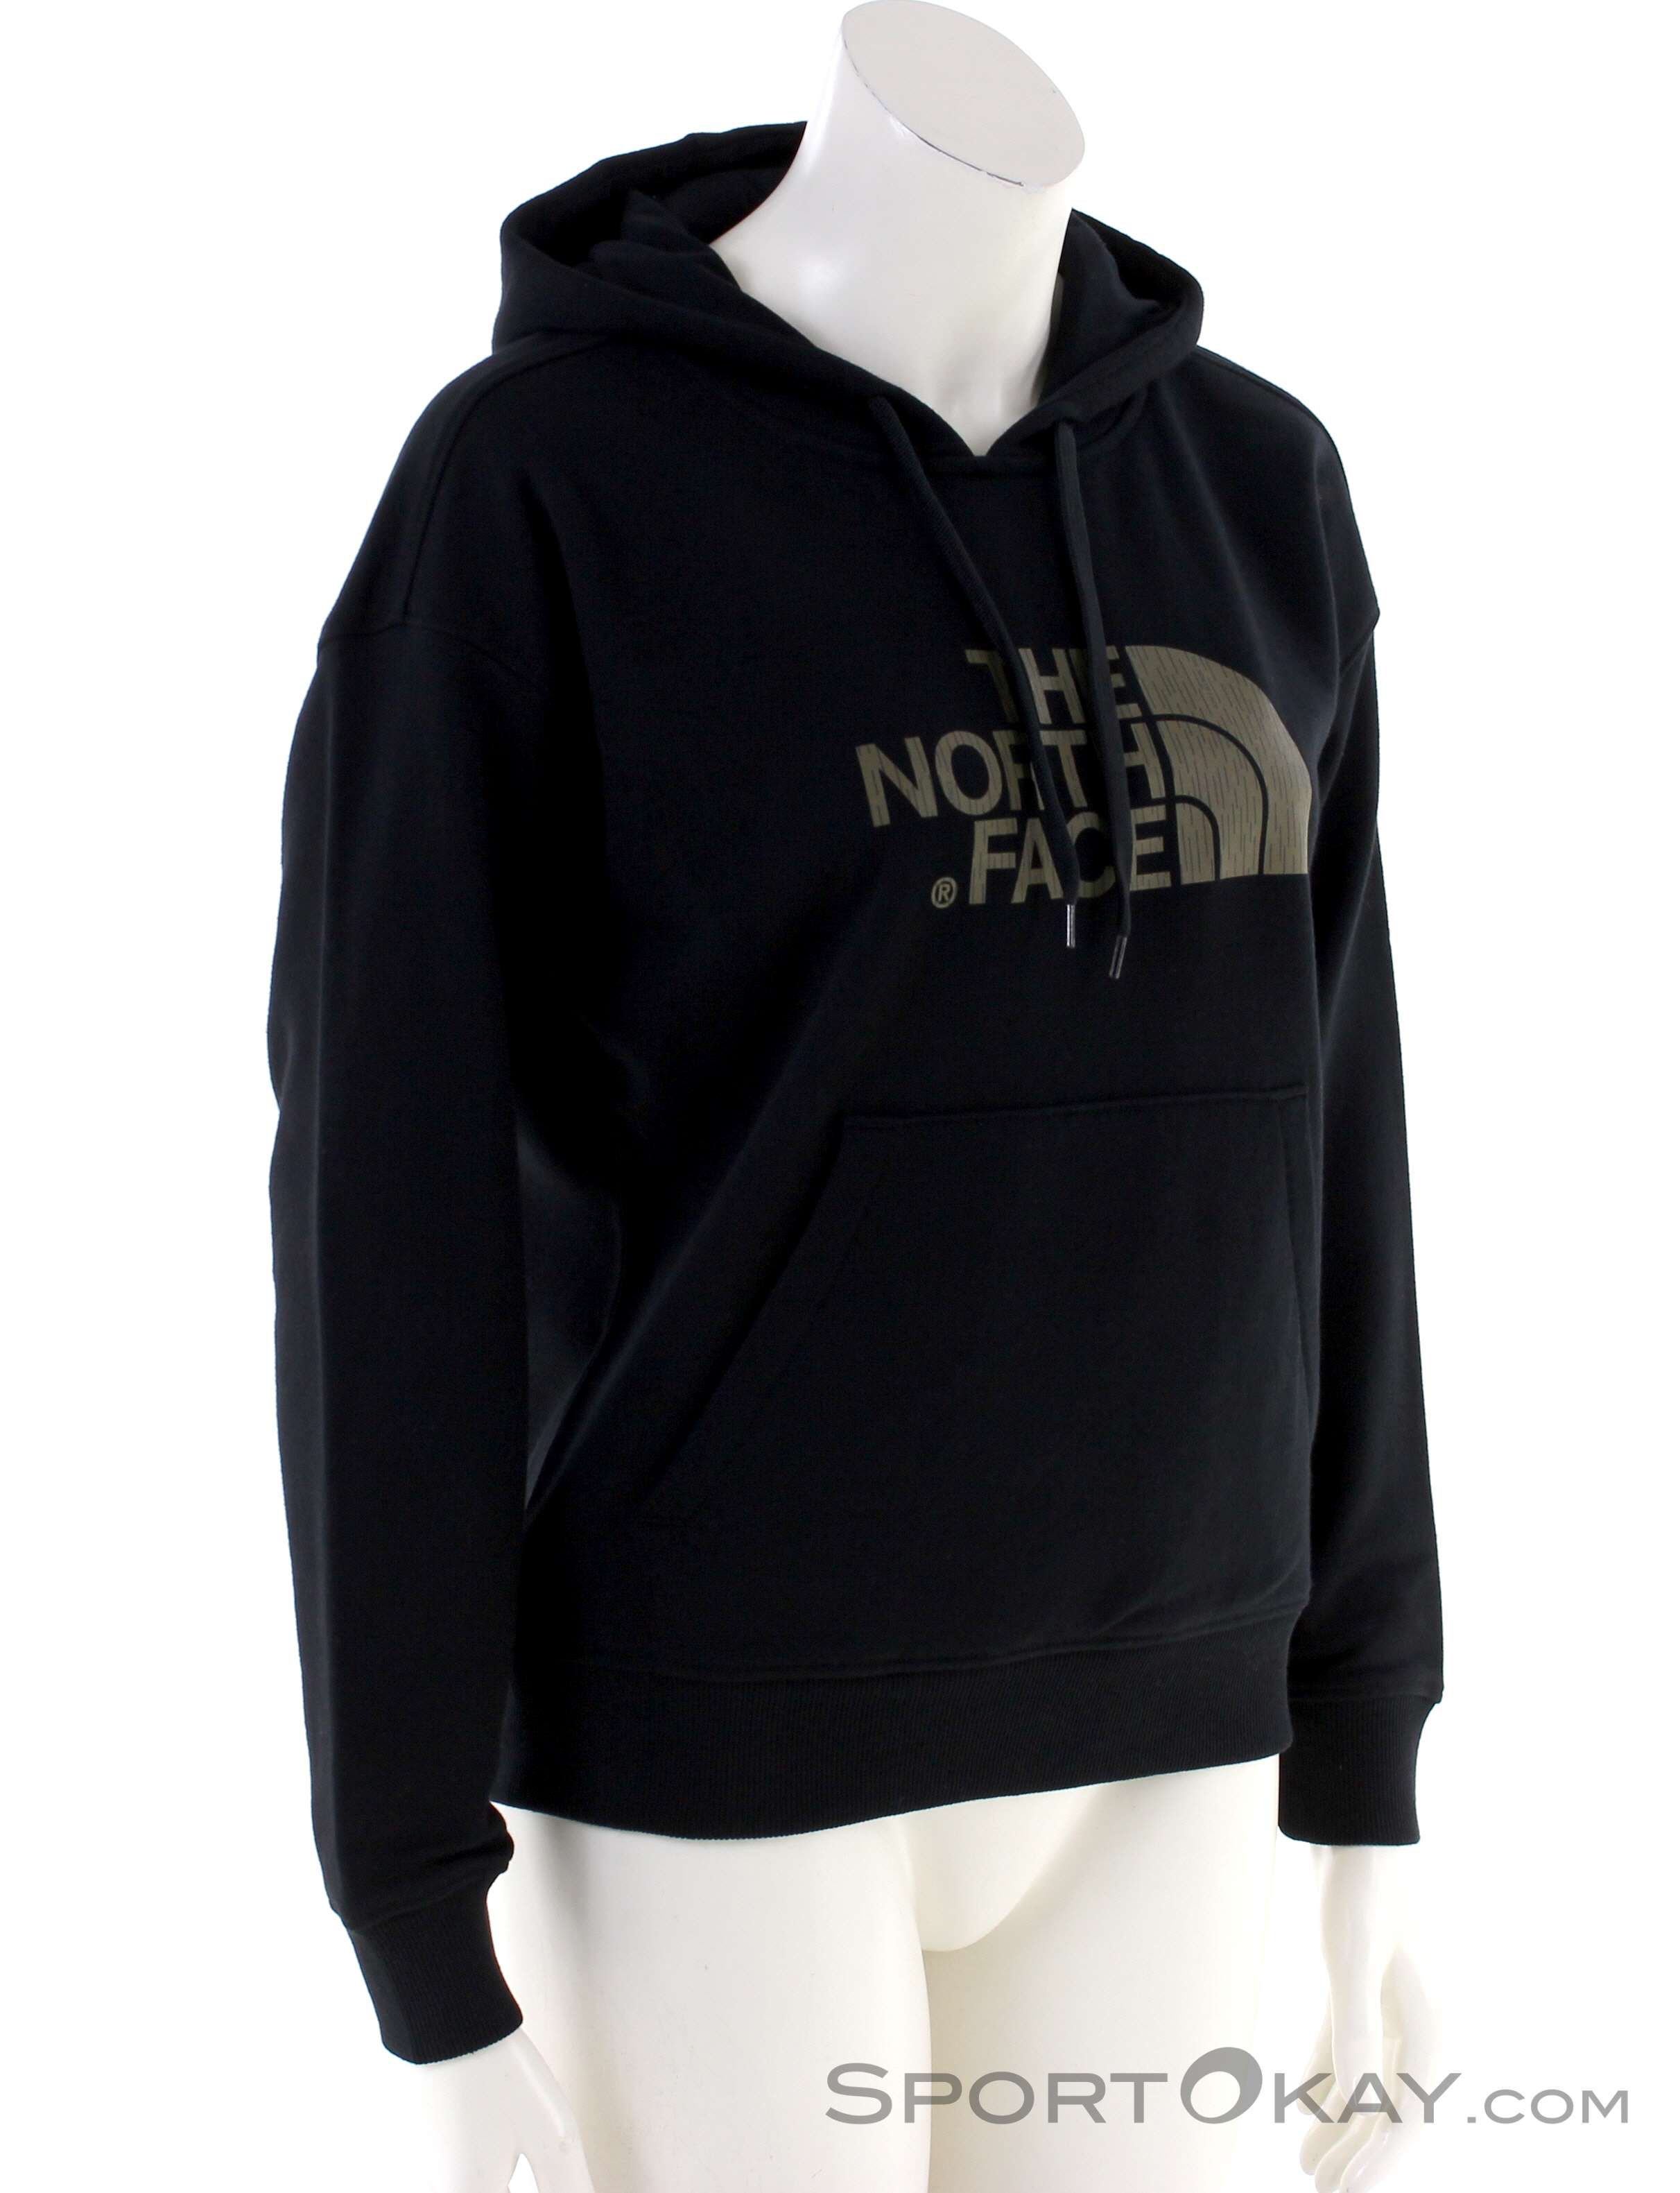 the north face womens hoodies